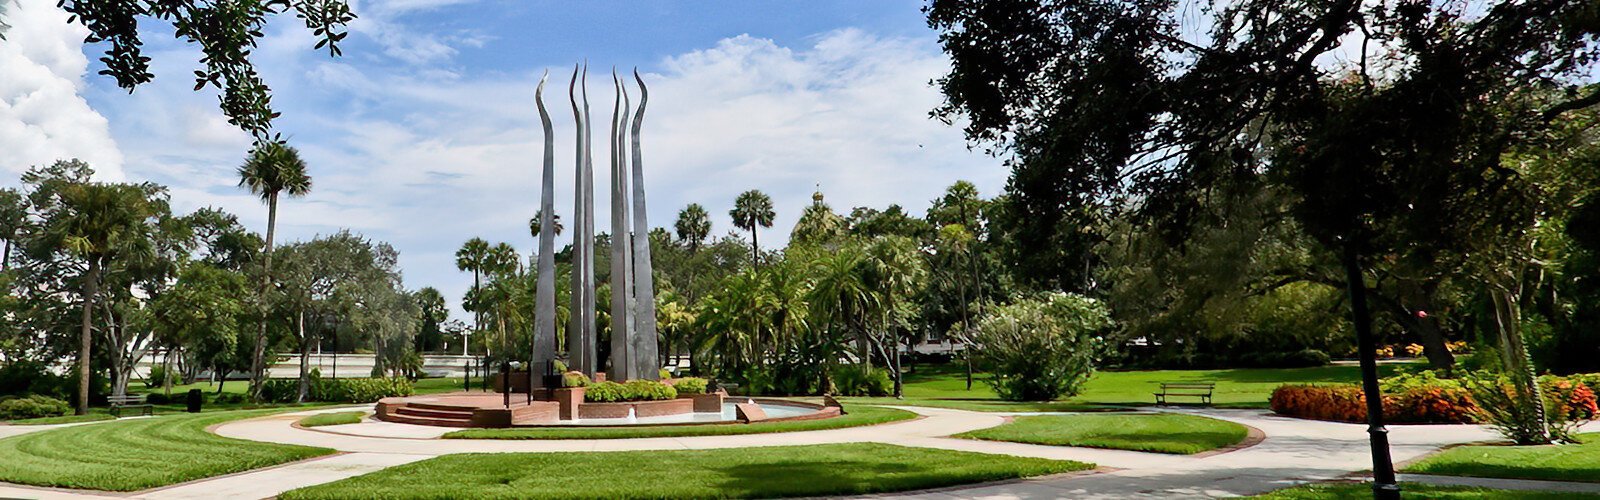  A focal point of Henry B. Plant Park, Tampa’s oldest and largest public botanical garden, “Sticks of Fire” is a sculpture created by O. V. Shaffer to commemorate the spirit of Tampa and honor the spirit of excellence at the University of Tampa.